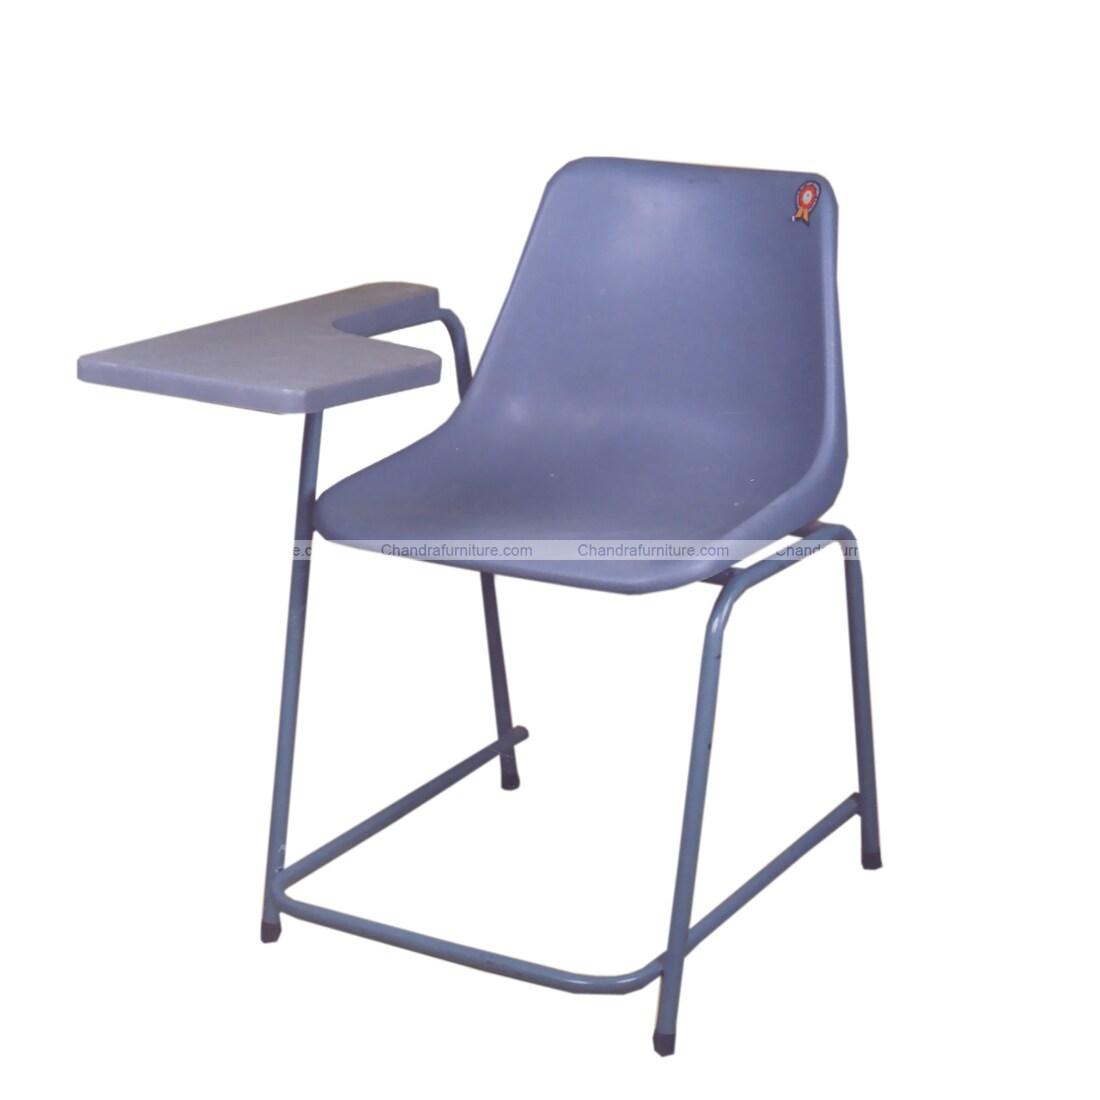  Chandra Furniture  6001 Institutional Single Seating Chair 